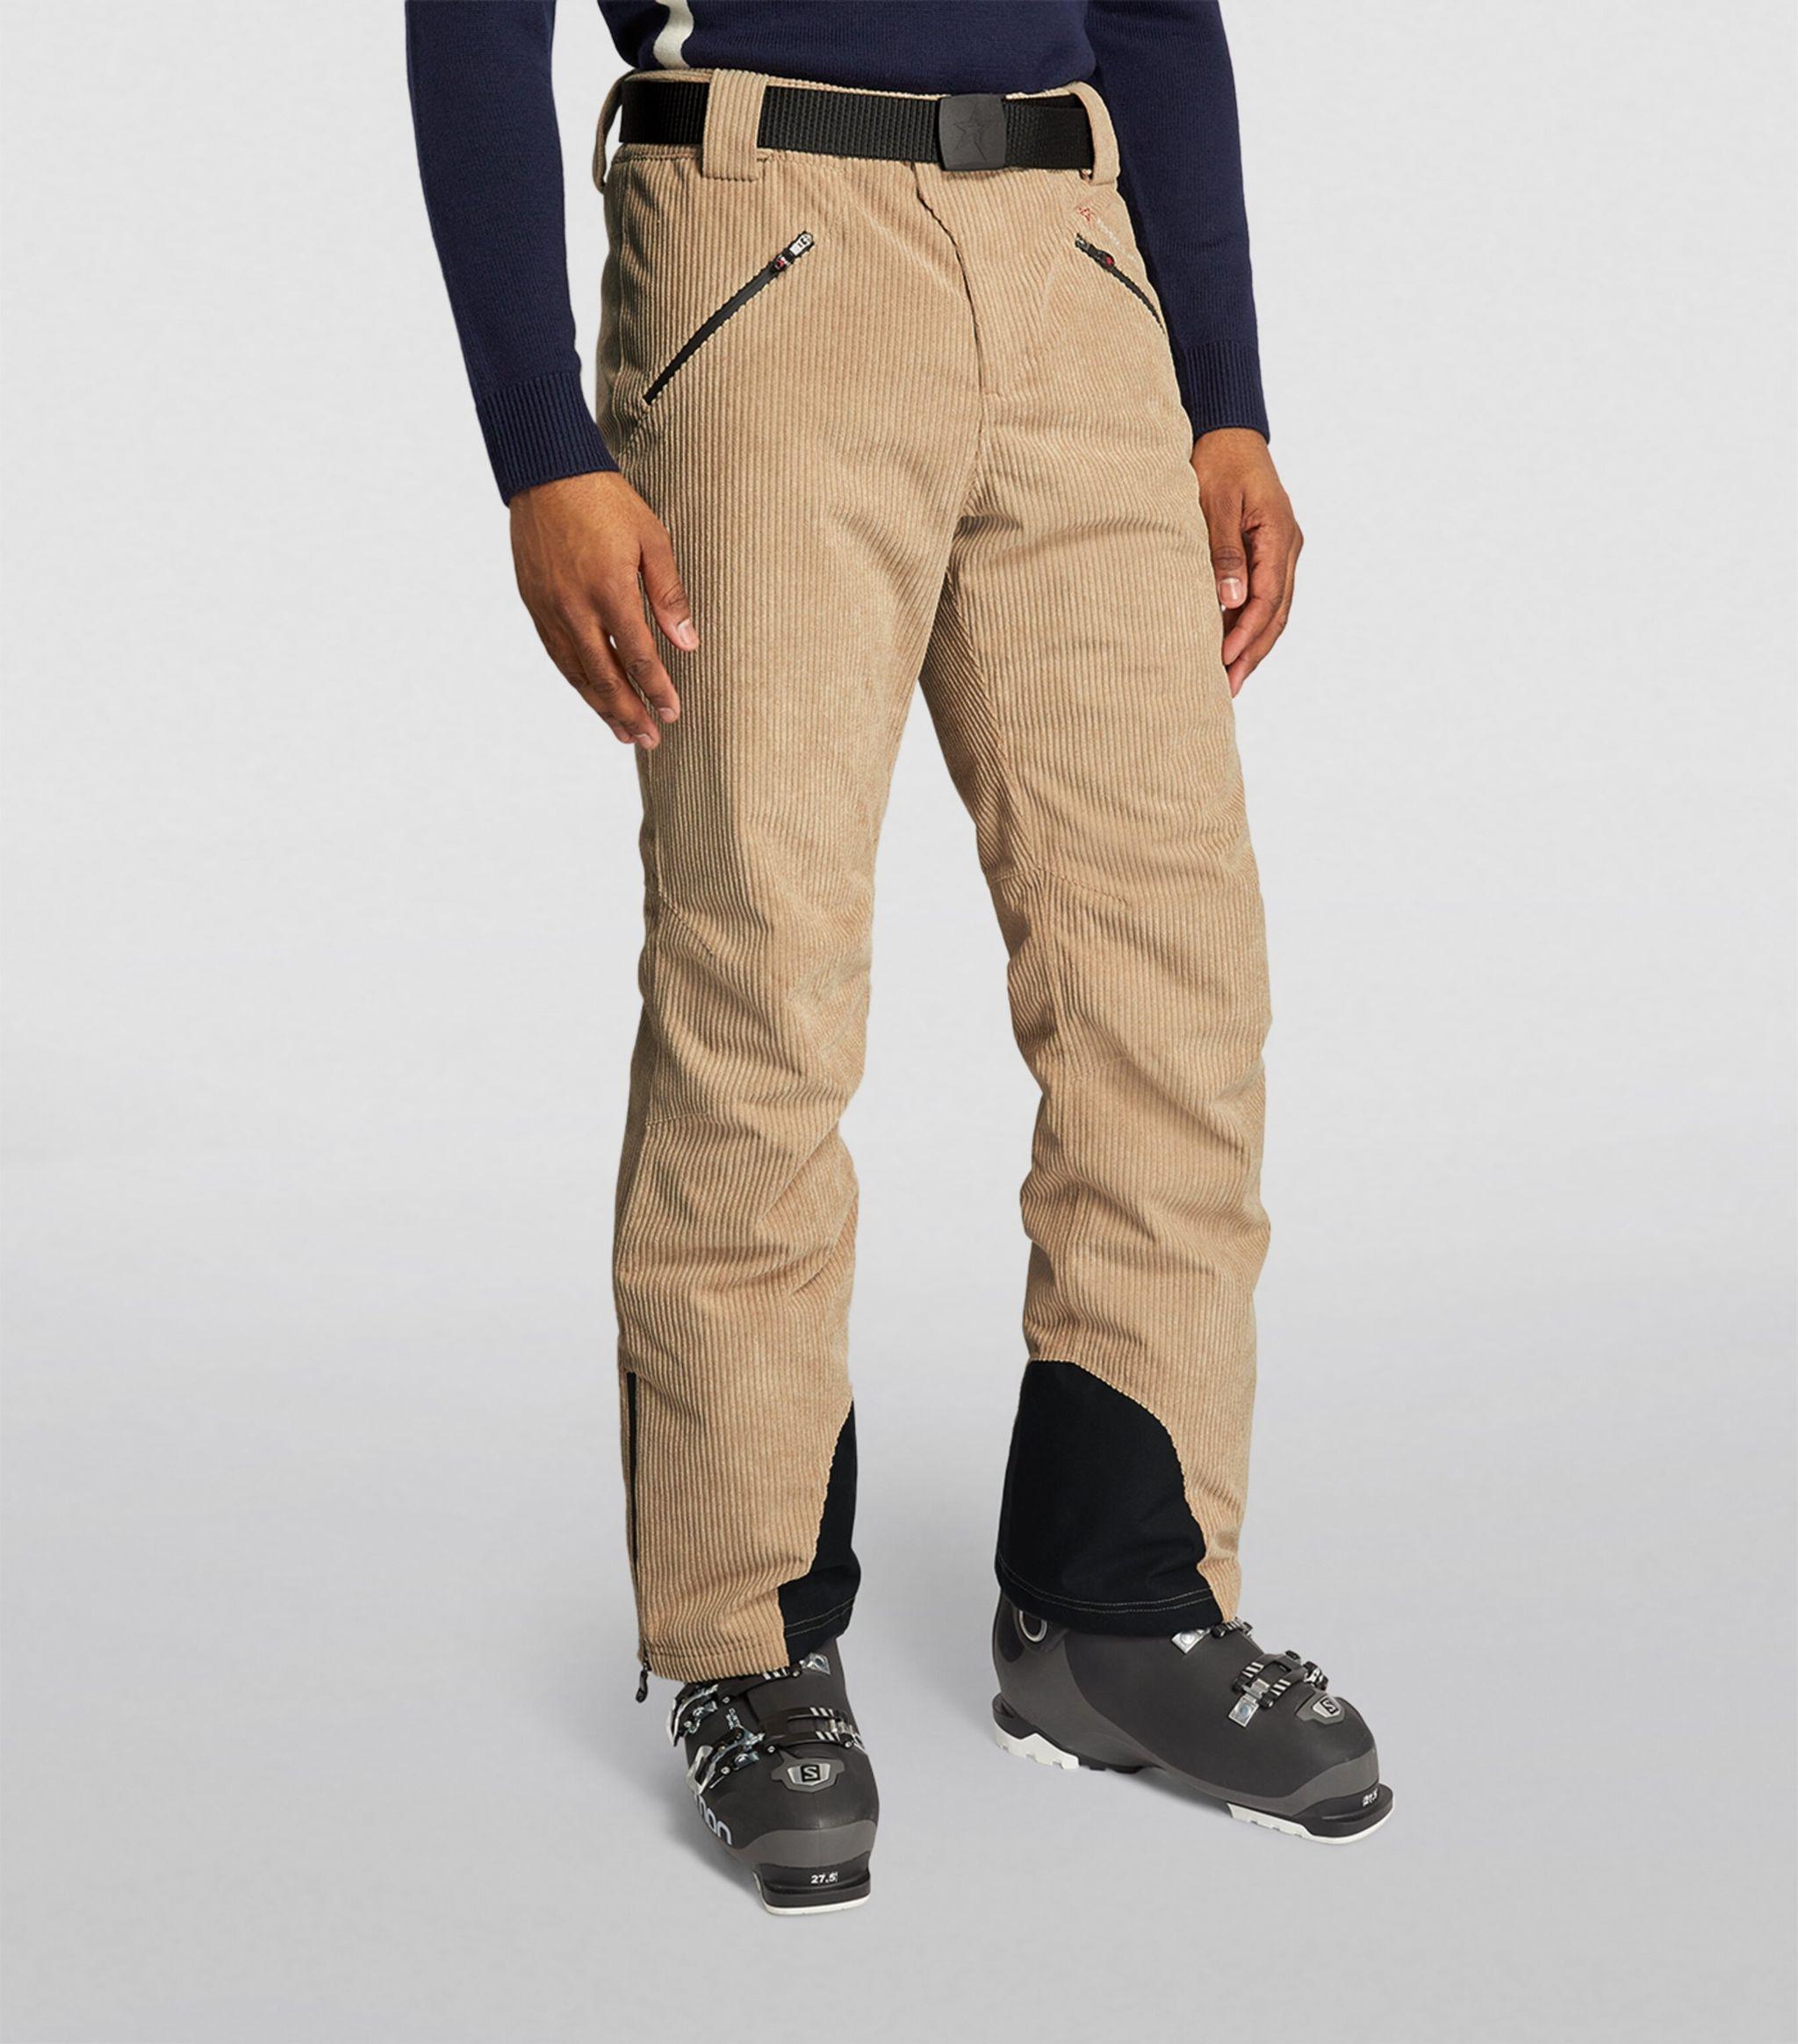 Perfect Moment Corduroy Chamonix Ski Trousers in Natural for Men | Lyst